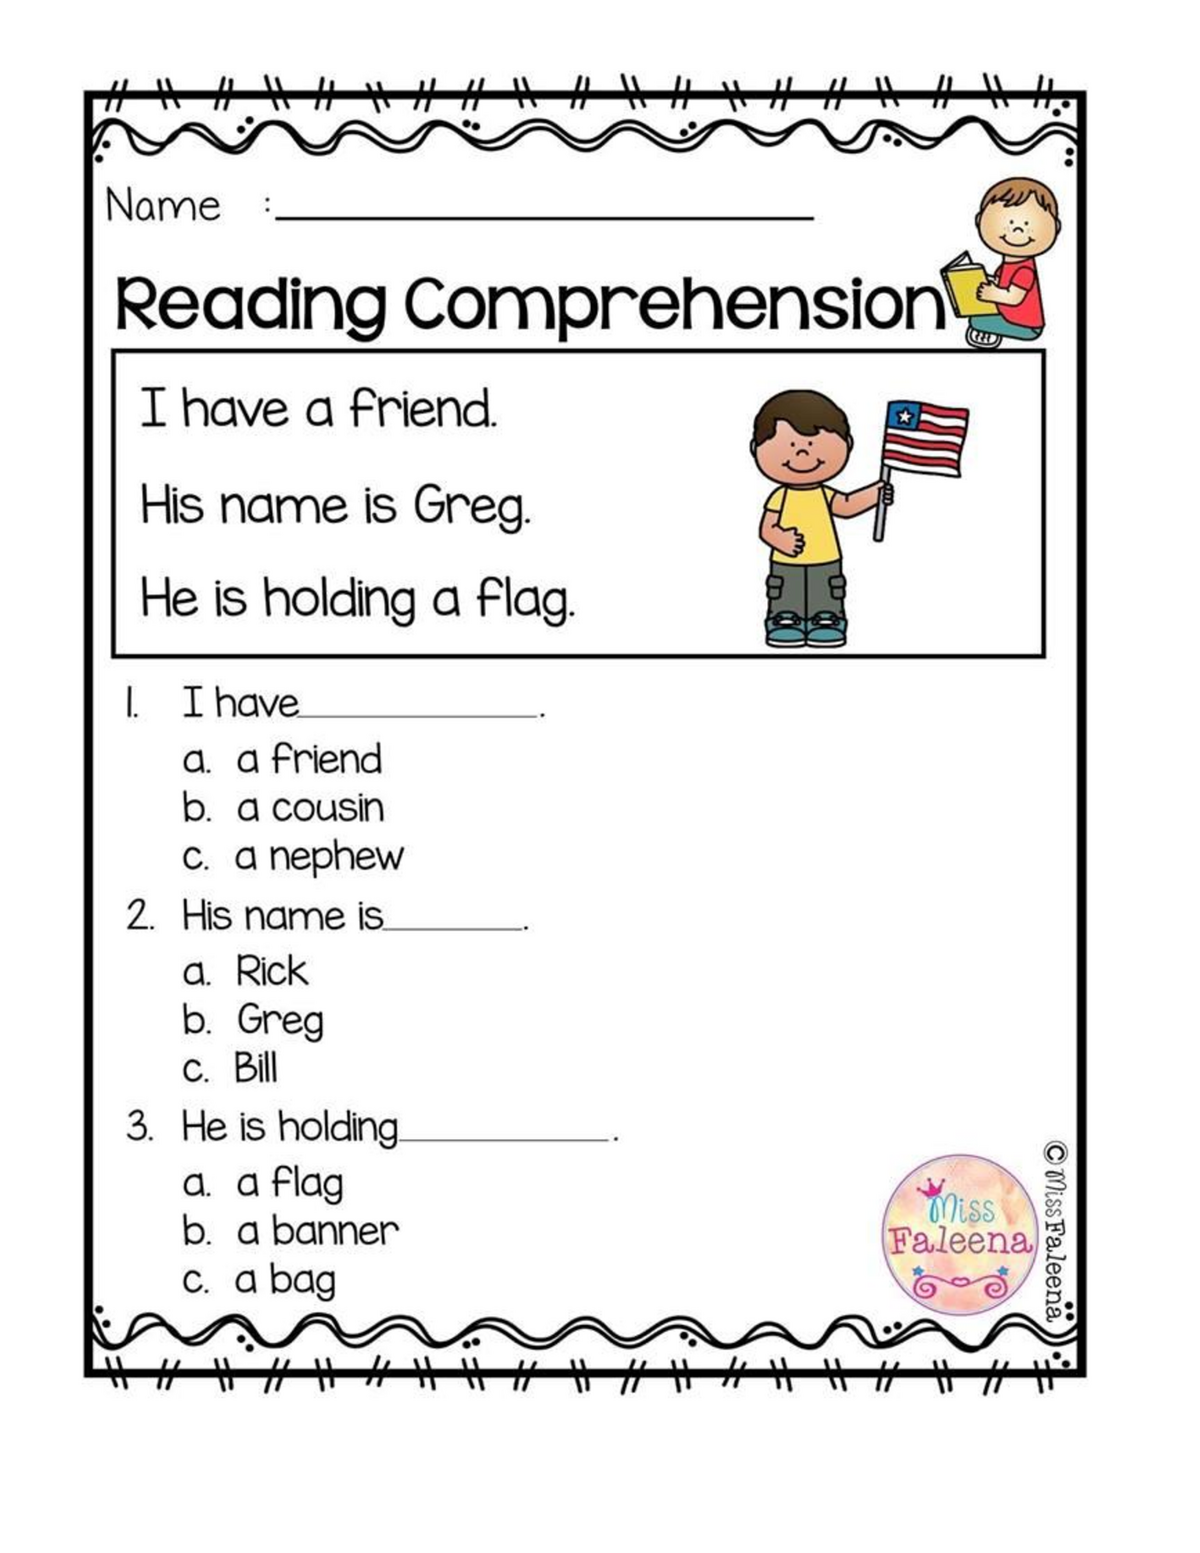 reading-comprehension-worksheets-for-grade-2-professional-education